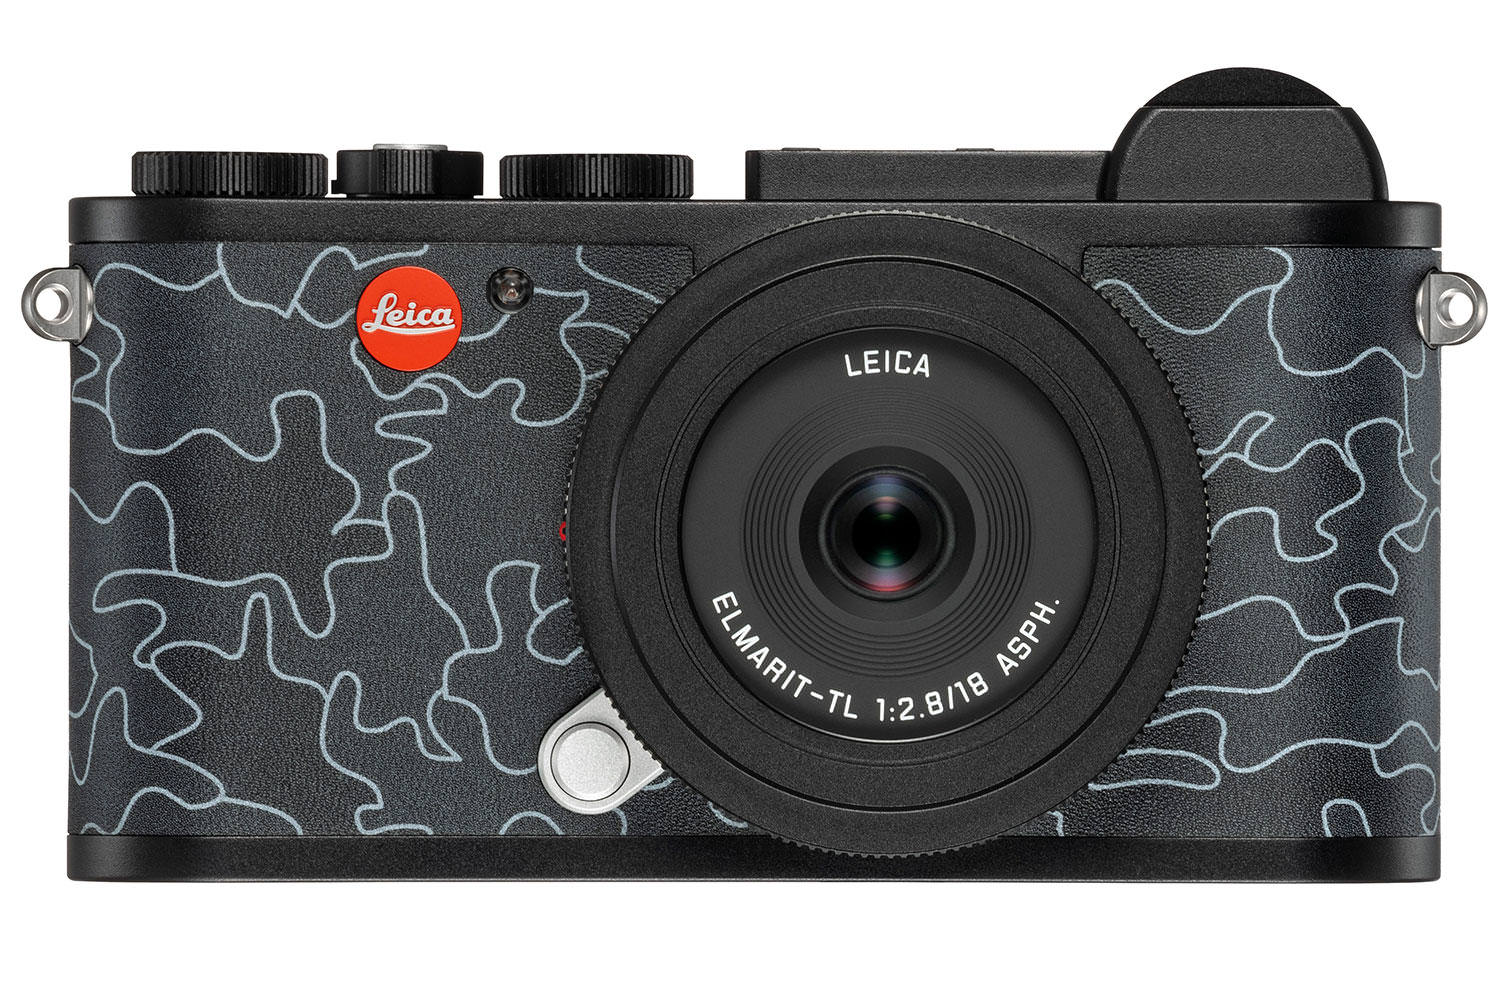 Leica Releases Limited Edition Camera Inspired By The Aesthetic Of The Concrete Jungle Exibart Street See more ideas about aesthetic, aesthetic photography, aesthetic pictures. leica releases limited edition camera